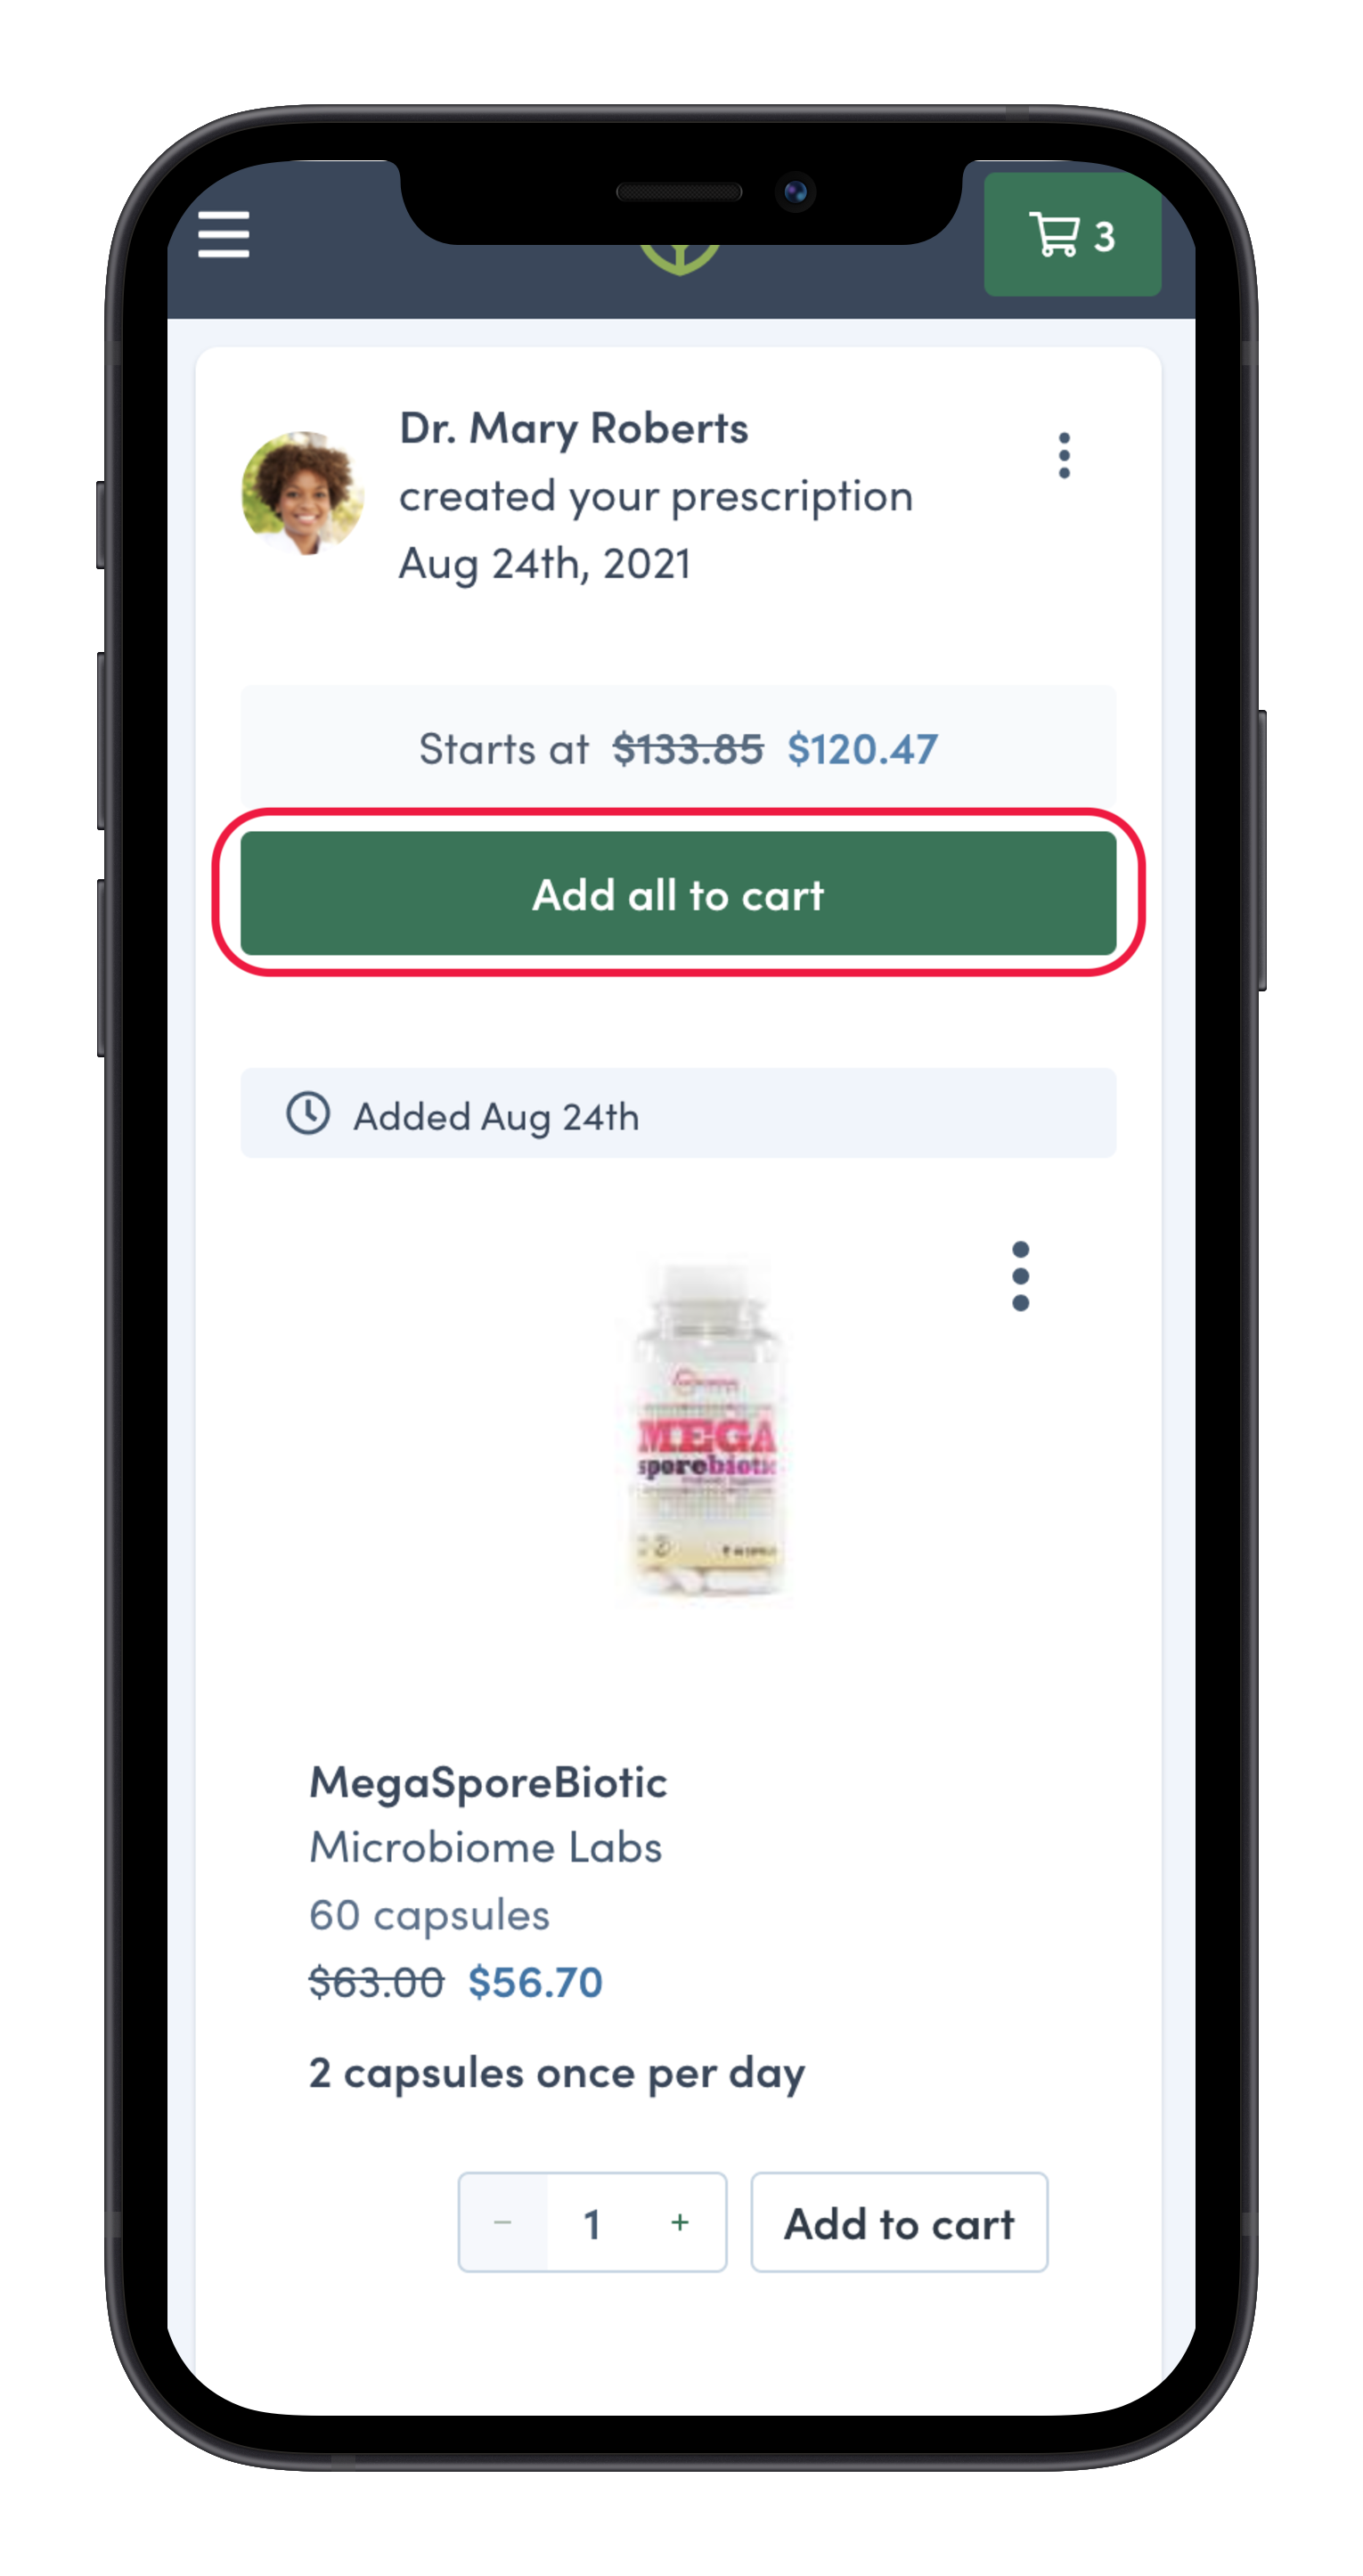 Adding products from a recommendation or prescription to your shopping cart